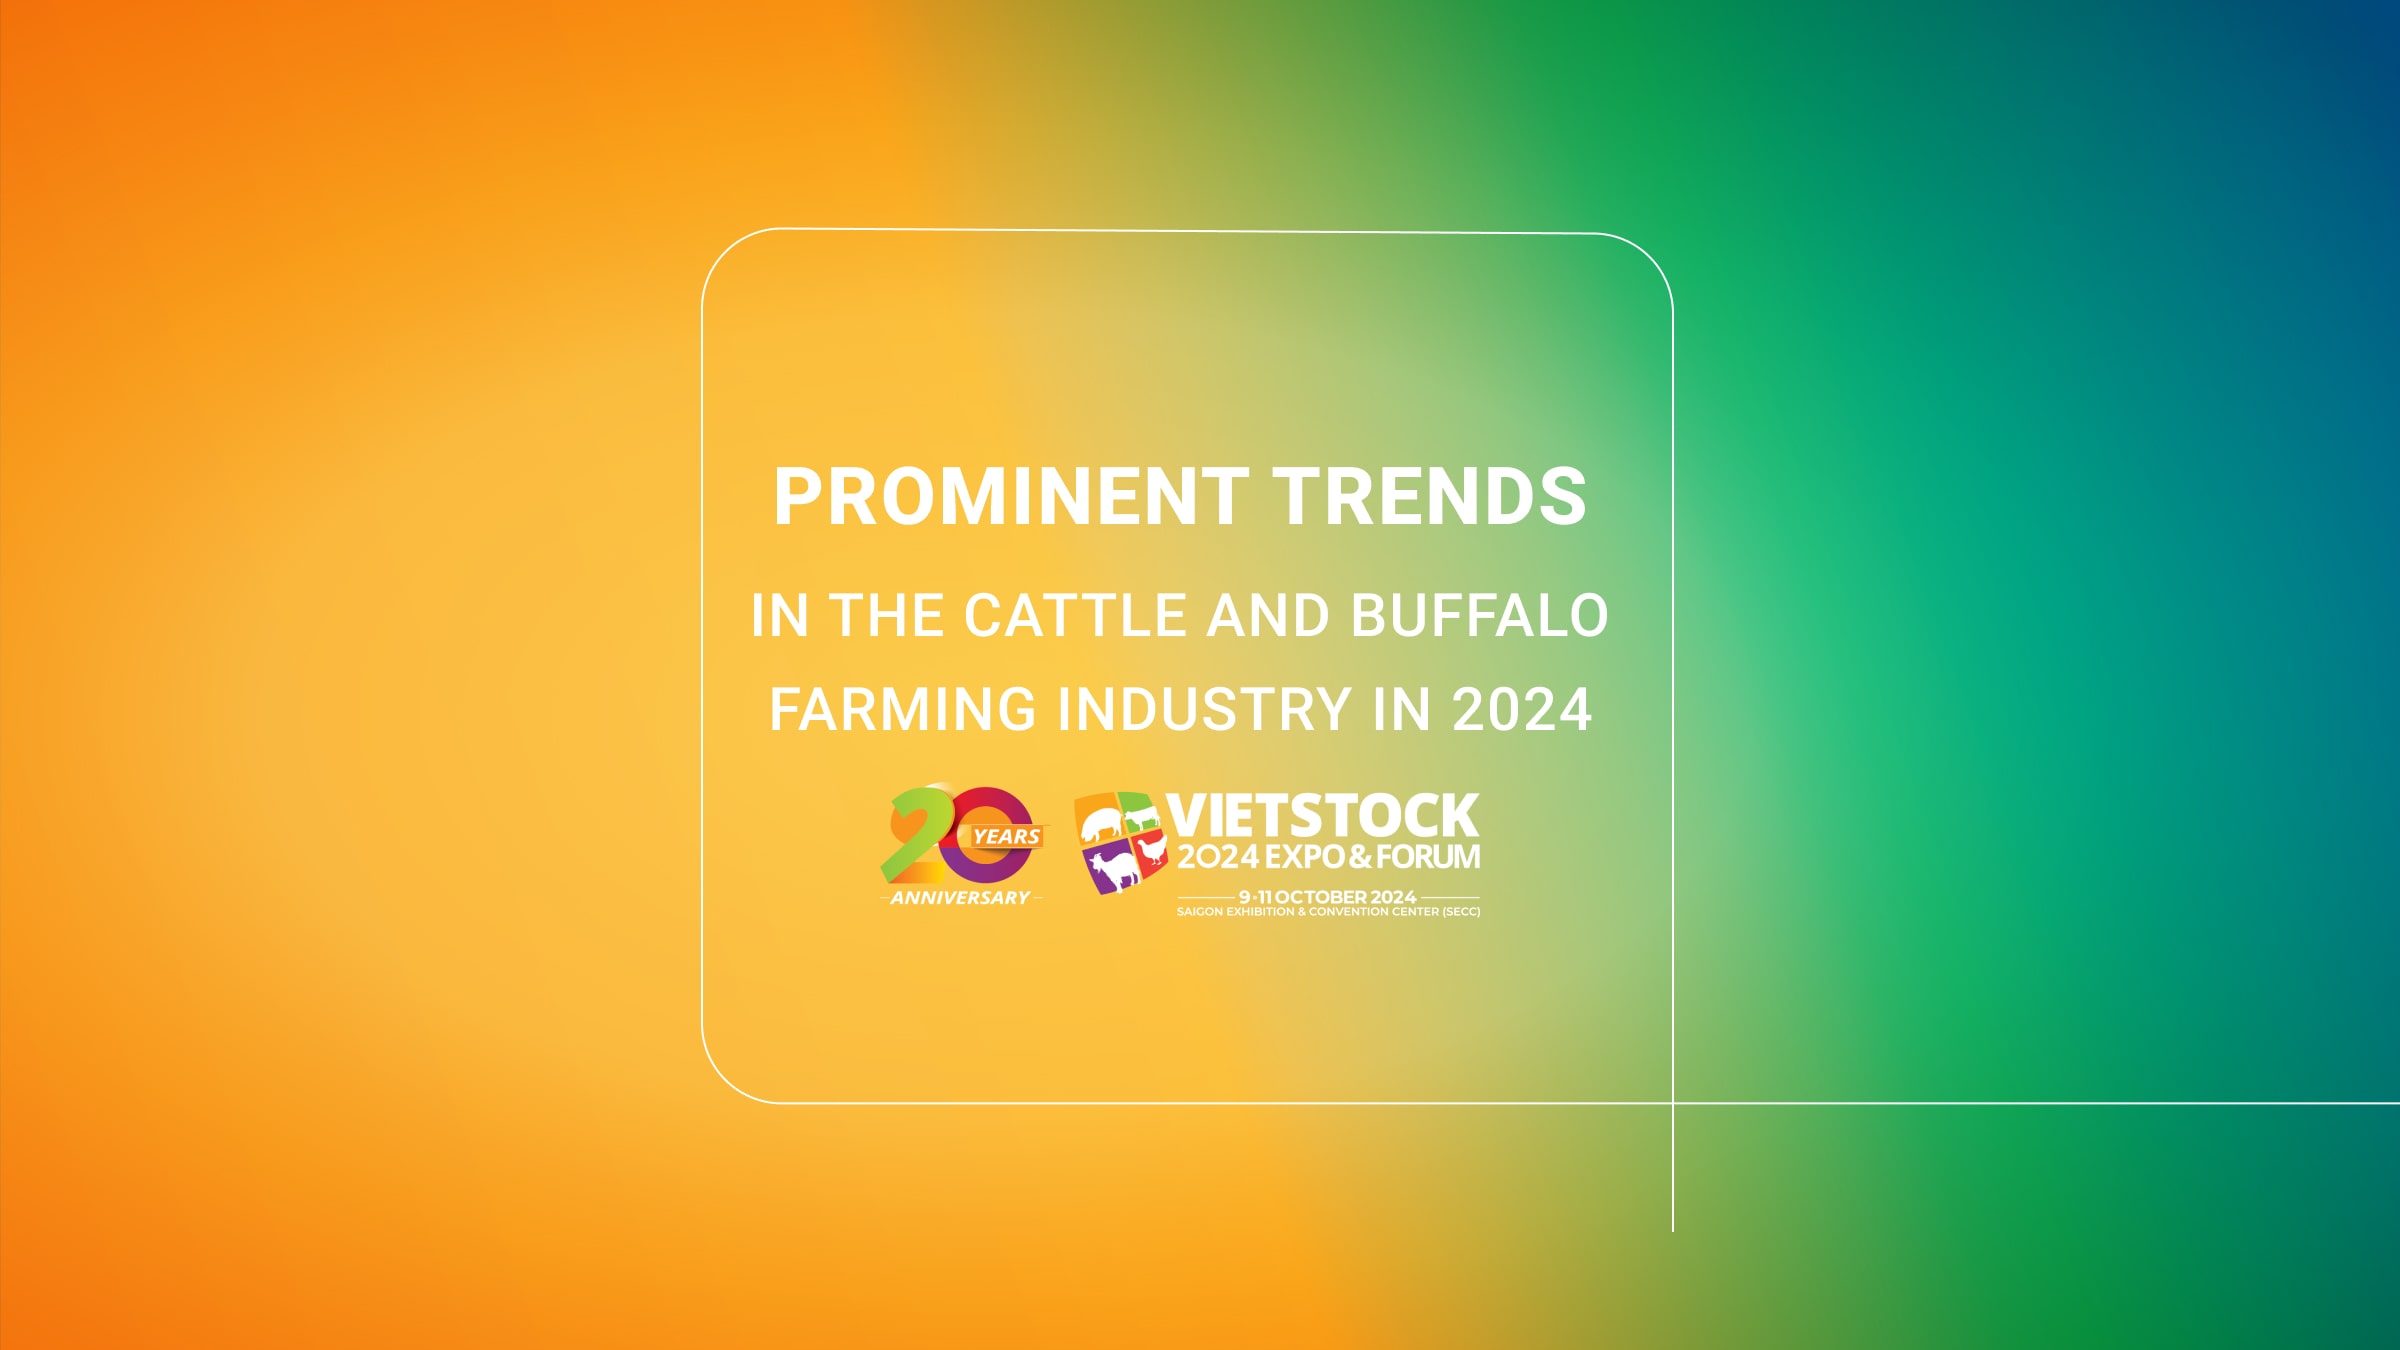 PROMINENT TRENDS IN THE CATTLE AND BUFFALO FARMING INDUSTRY IN 2024